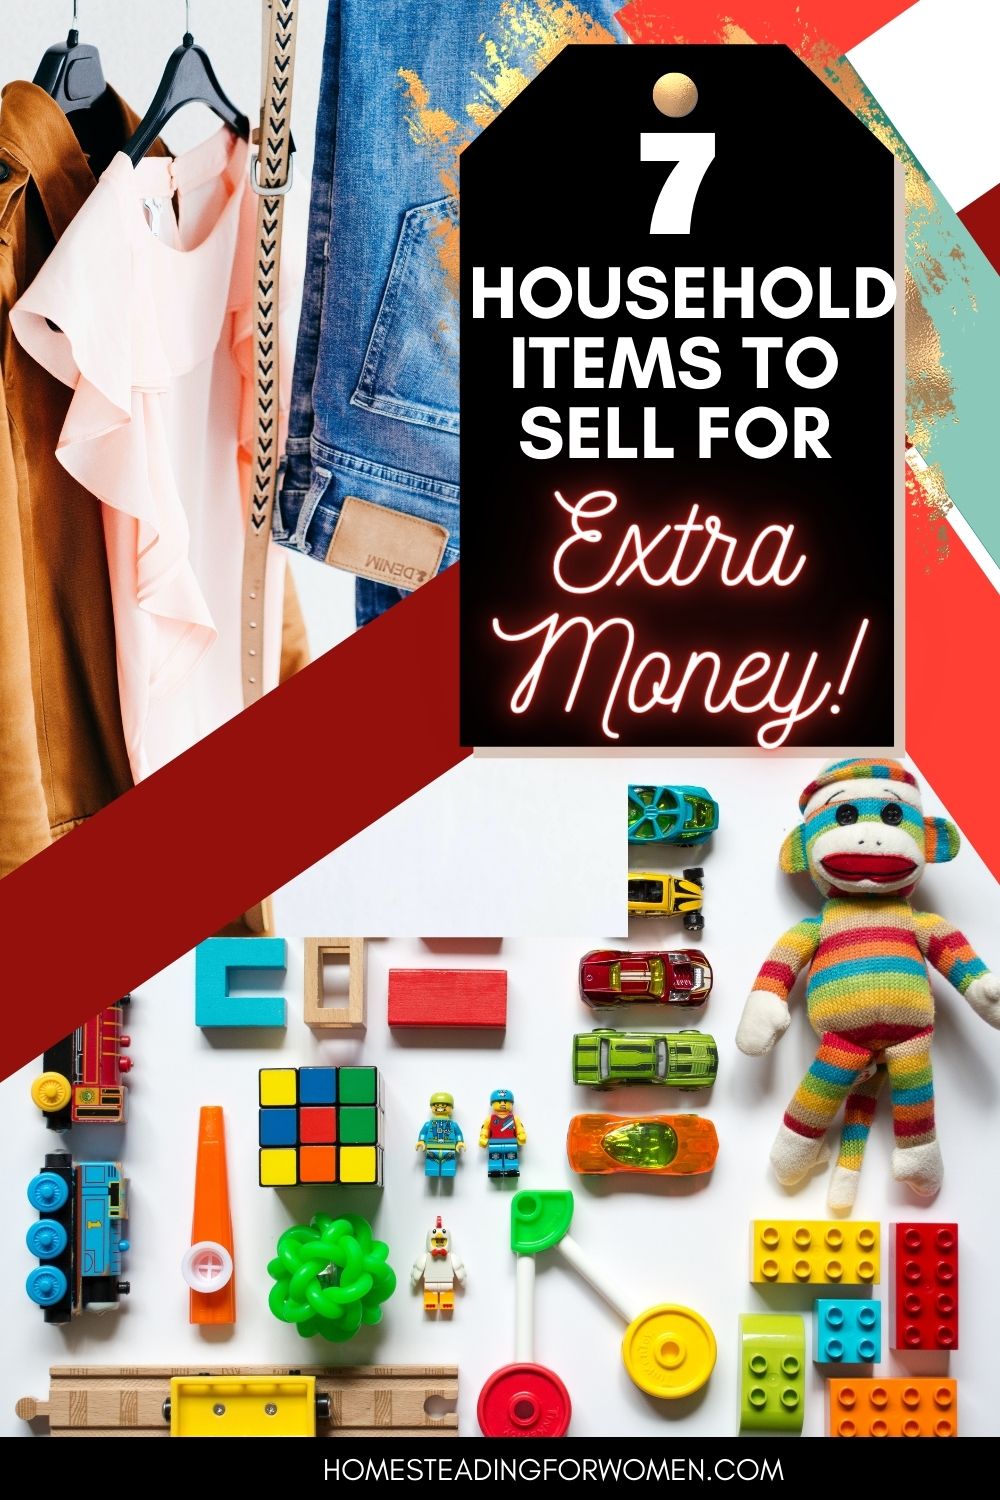 7 Household Items to sell for extra money